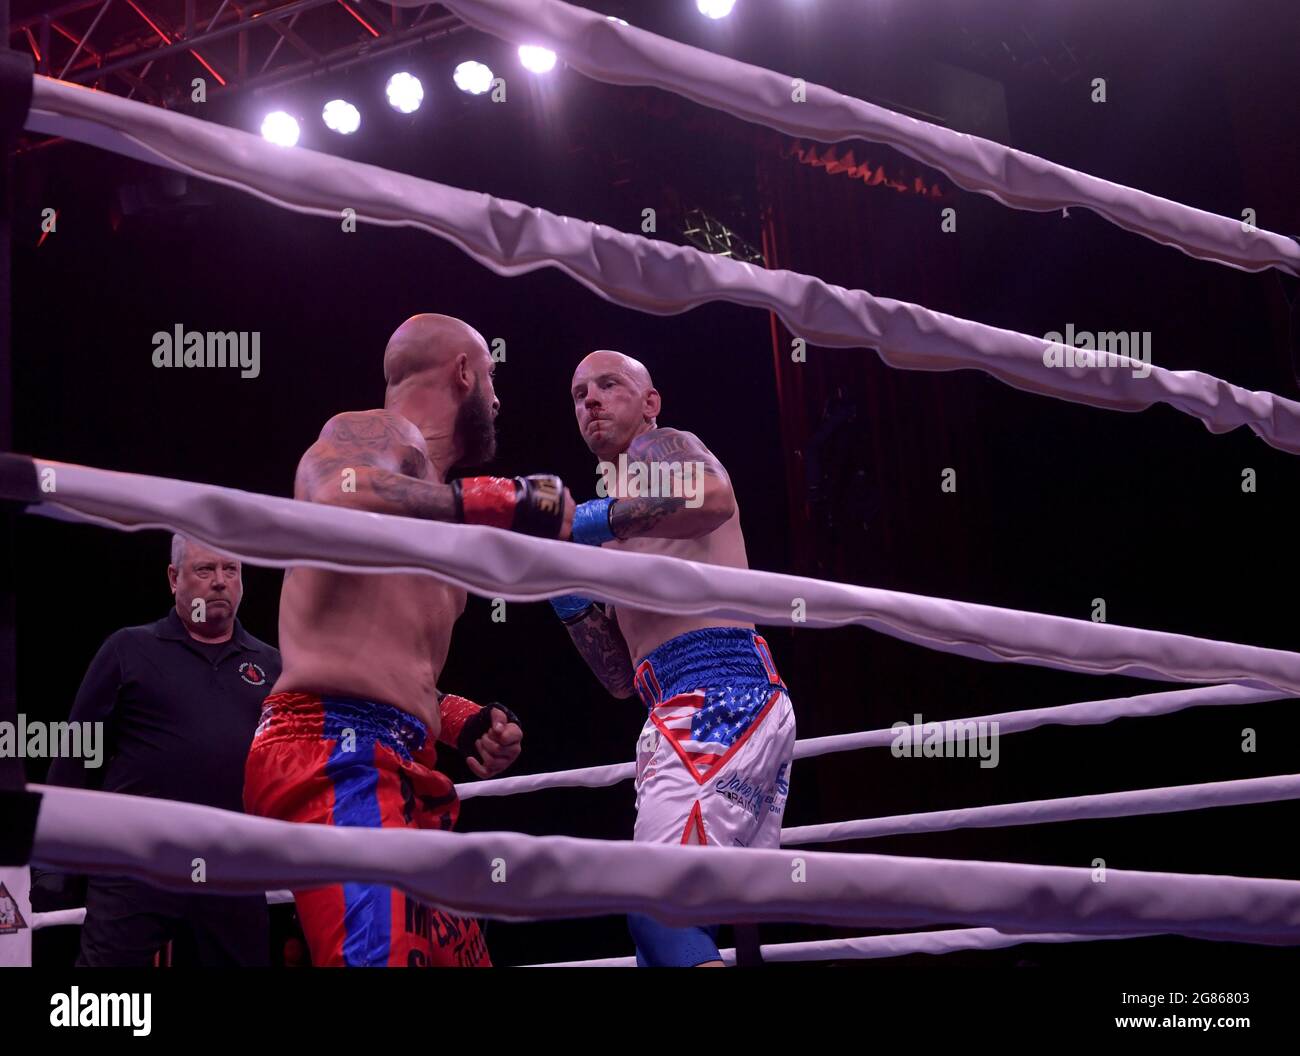 Hollywood, FL, USA. 16th July, 2021. Matt Delanoit, Rene Rodriguez pictured as Matt Delanoit defeats Rene Rodriguez in the main bout in the Bareknuckle Backyard Brawls at the Seminole Hard Rock & Casino on July 16, 2021 in Hollywood, Florida. Credit: Hoo Me.Com/Media Punch/Alamy Live News Stock Photo